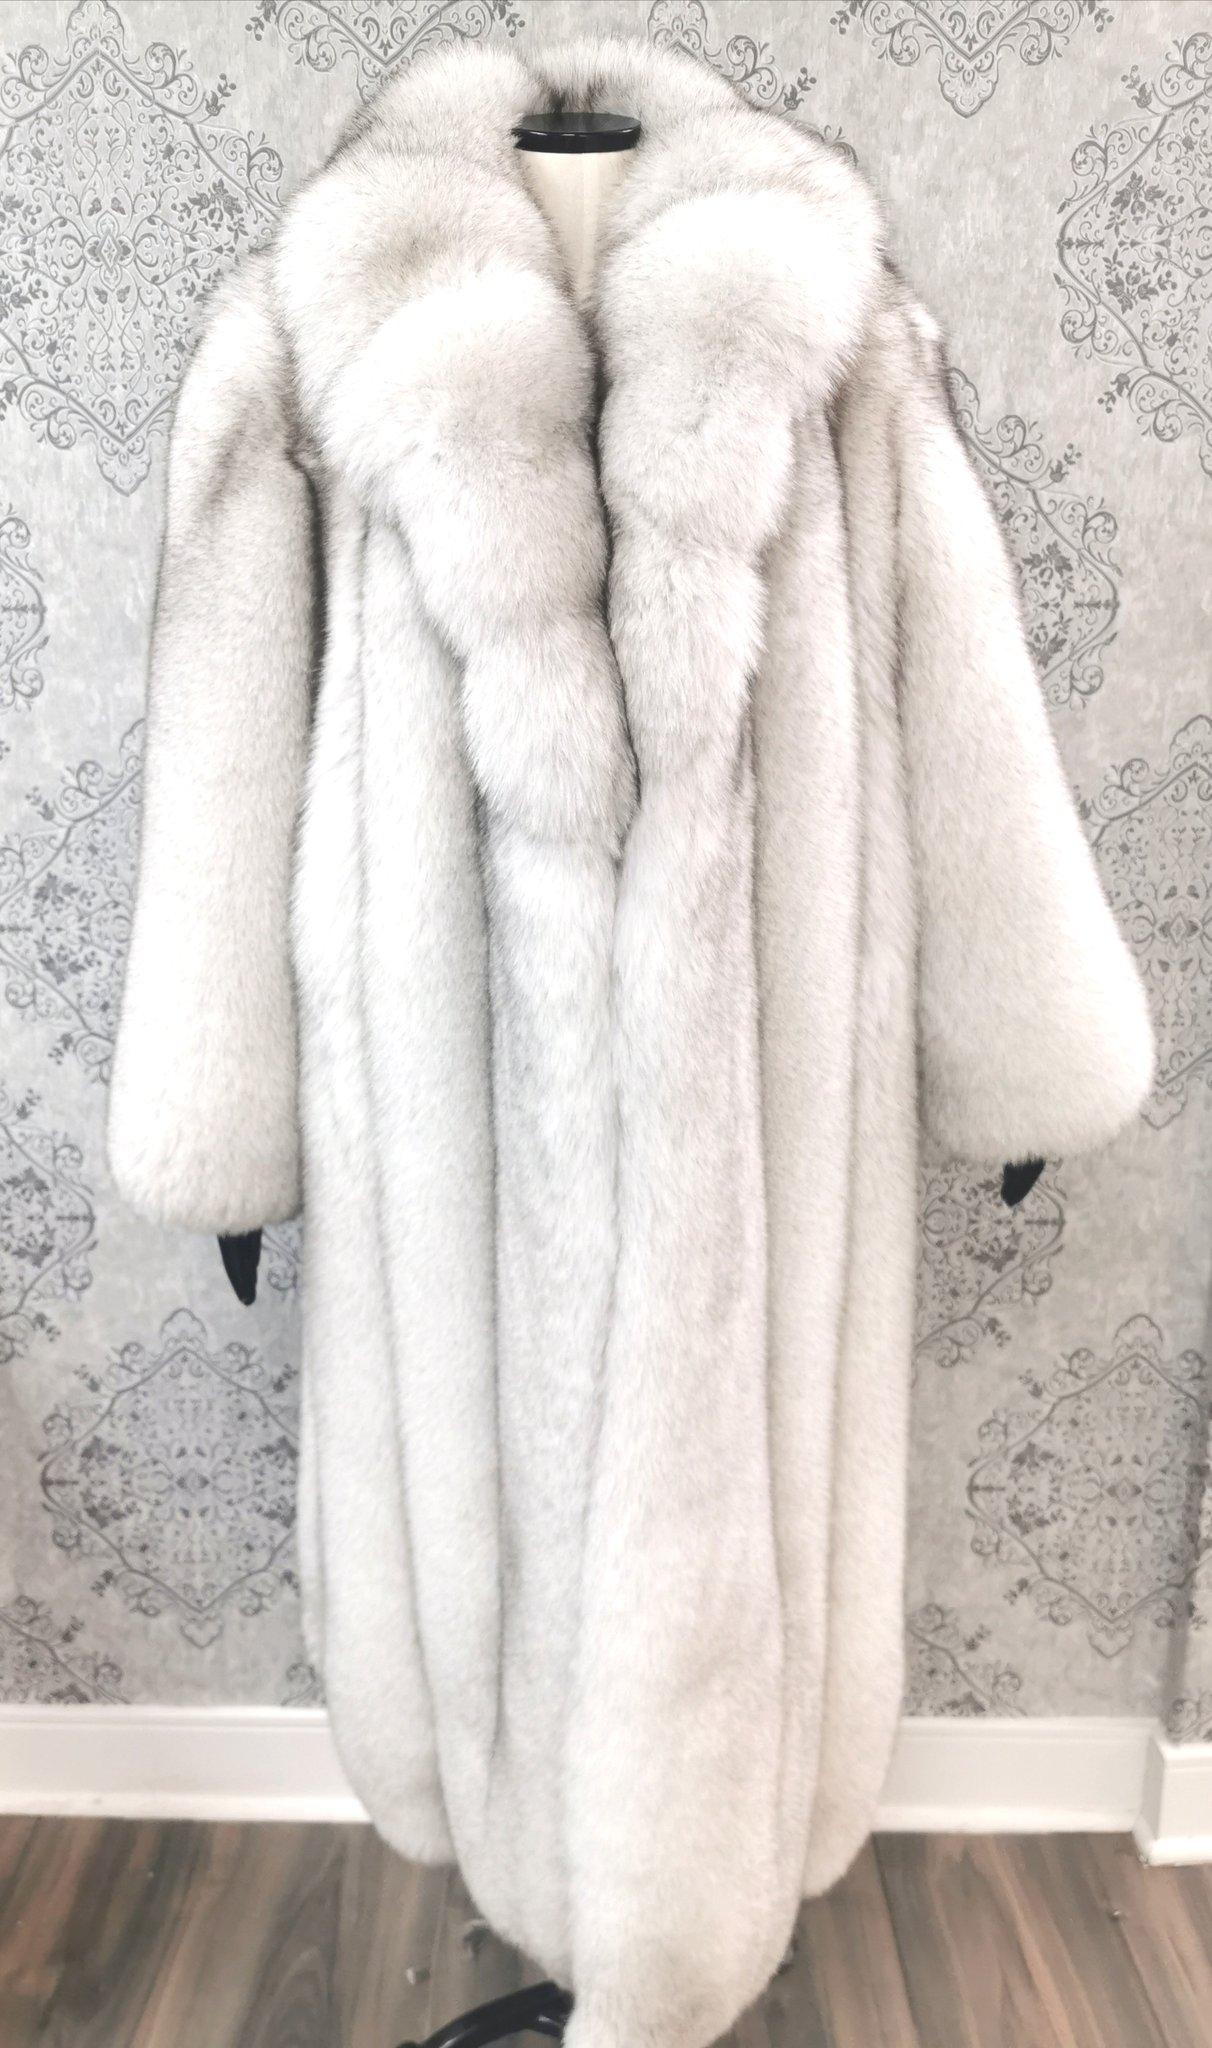 PRODUCT DESCRIPTION:

Brand new luxurious Blue Fox fur coat 

Condition: Brand New

Closure: Buttons

Color: White

Material: Blue Fox

Garment type: Coat

Sleeves: Straight

Pockets: No pockets

Collar: Portrait

Lining: Shirred Silk satin

Made in